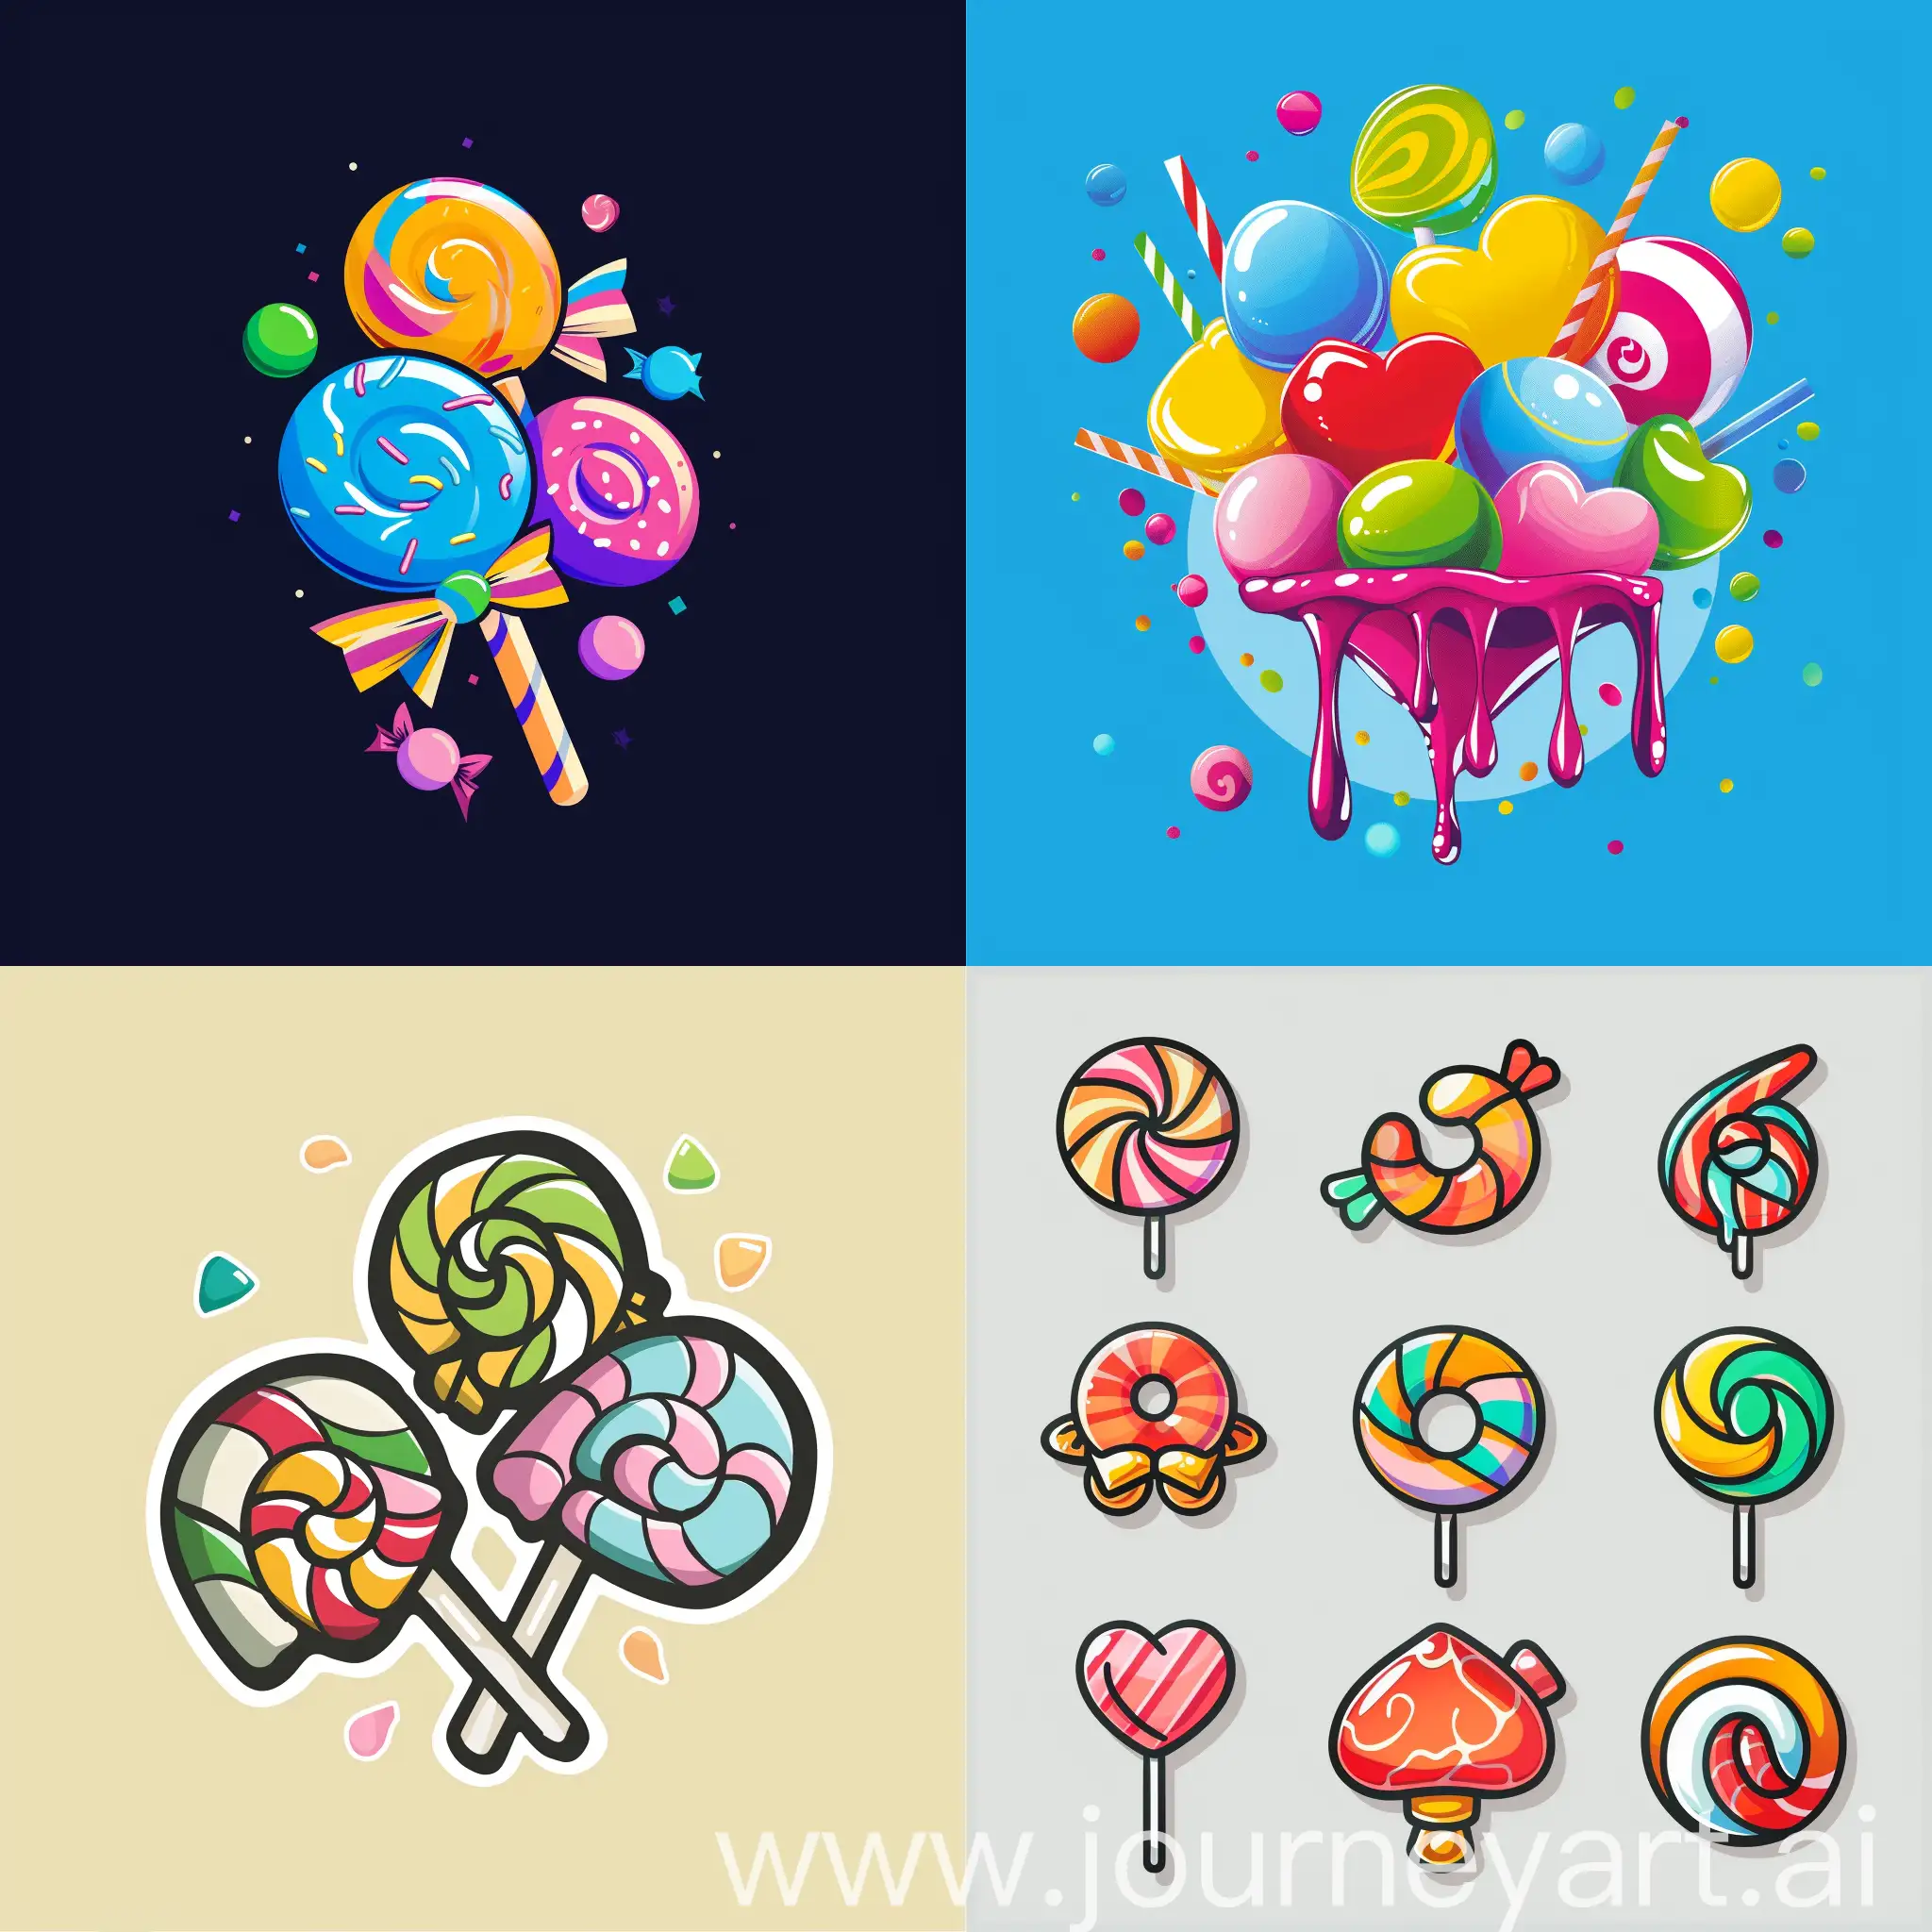 Colorful-Candy-and-Lollypop-Logo-Design-Best-Adobe-Illustrator-Creations